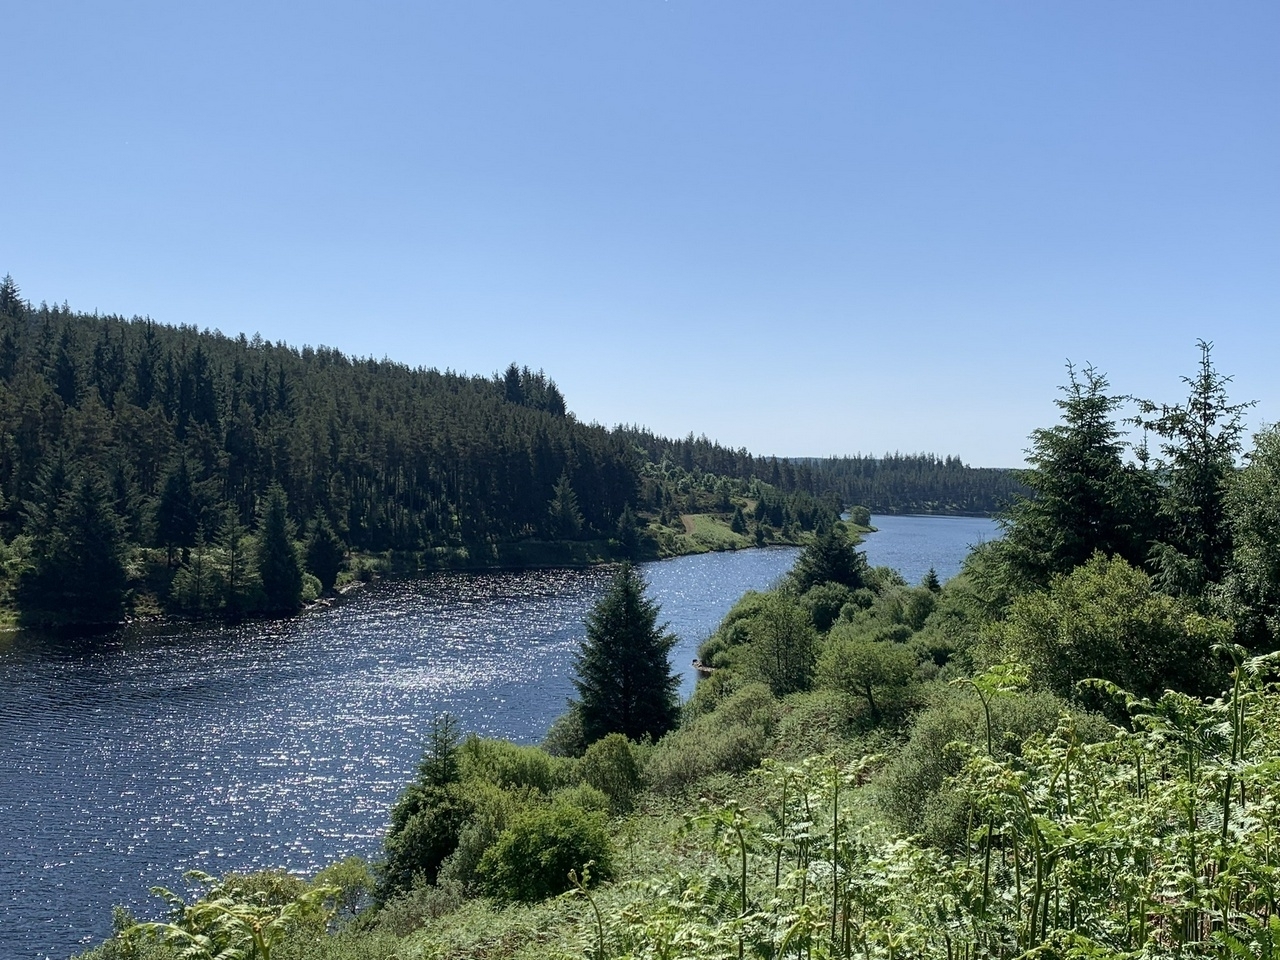 View across Kielder Water from the top of a hill on the north side of the reservoir. Edges of the water lined with trees. The sun is shining and sky is blue.